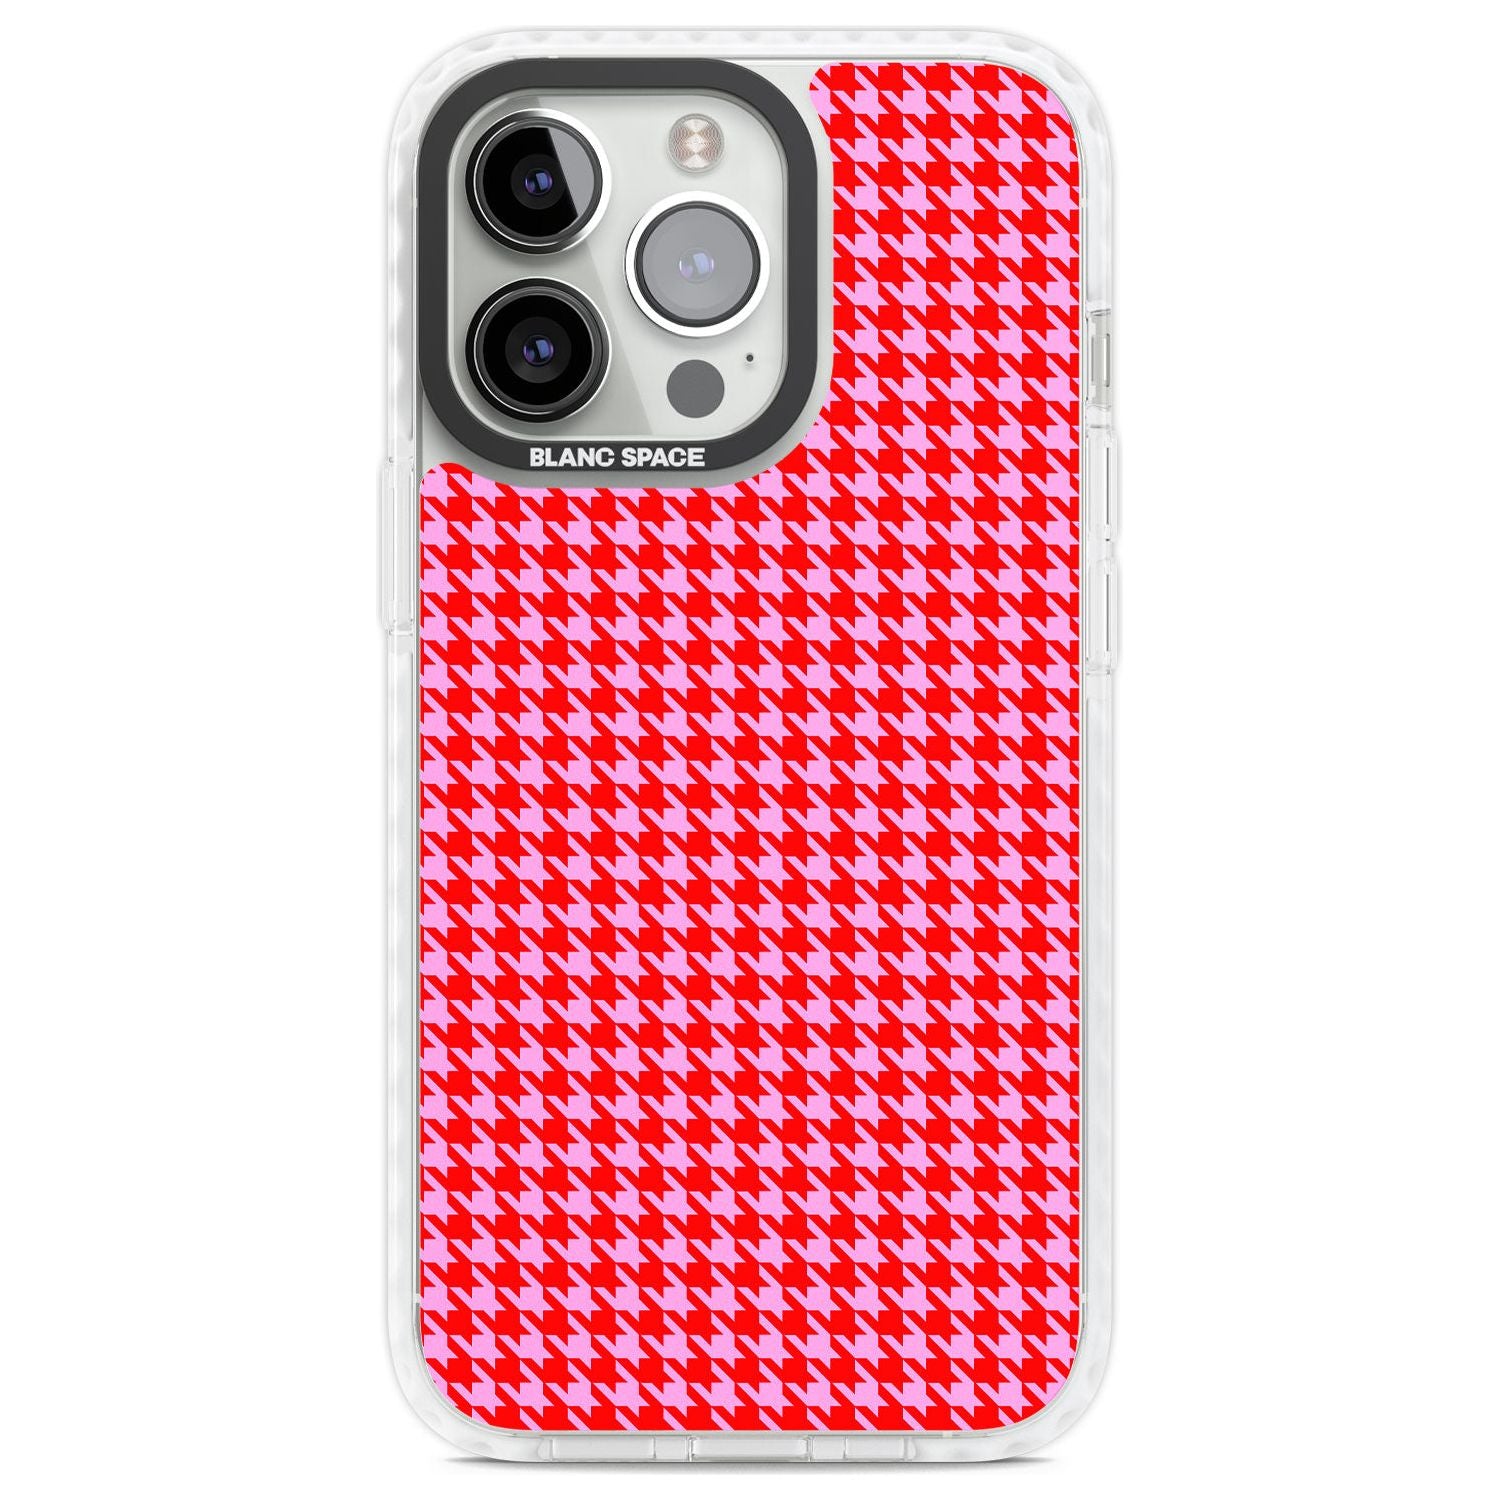 Neon Pink & Red Houndstooth Pattern Phone Case iPhone 13 Pro / Impact Case,iPhone 14 Pro / Impact Case,iPhone 15 Pro Max / Impact Case,iPhone 15 Pro / Impact Case Blanc Space